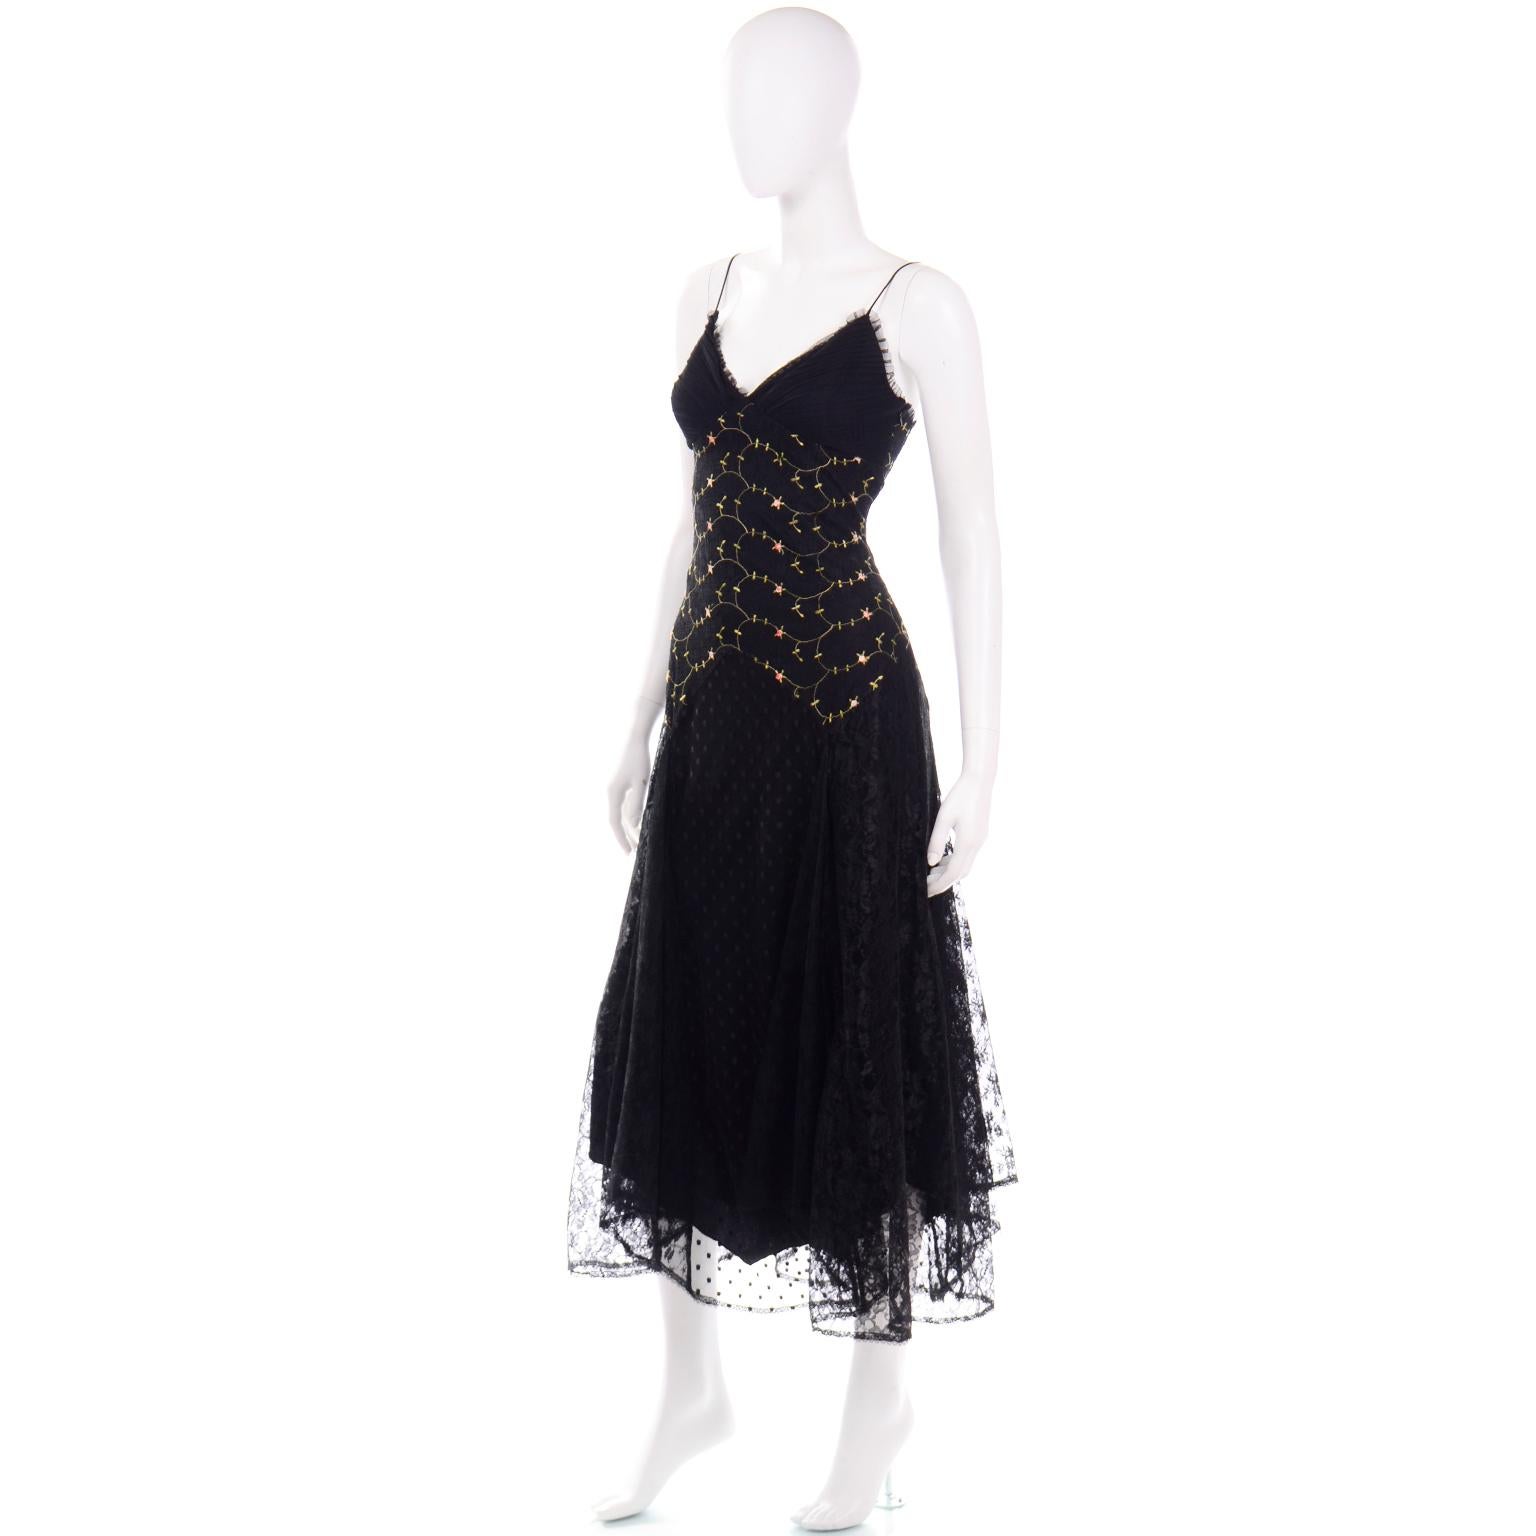 This vintage 1990's Betsey Johnson black lace and tulle embroidered evening dress is so pretty in person! Vintage Betsey Johnson pieces are always great to collect but more importantly, they are so much fun to wear! This dress has a beautiful mix of